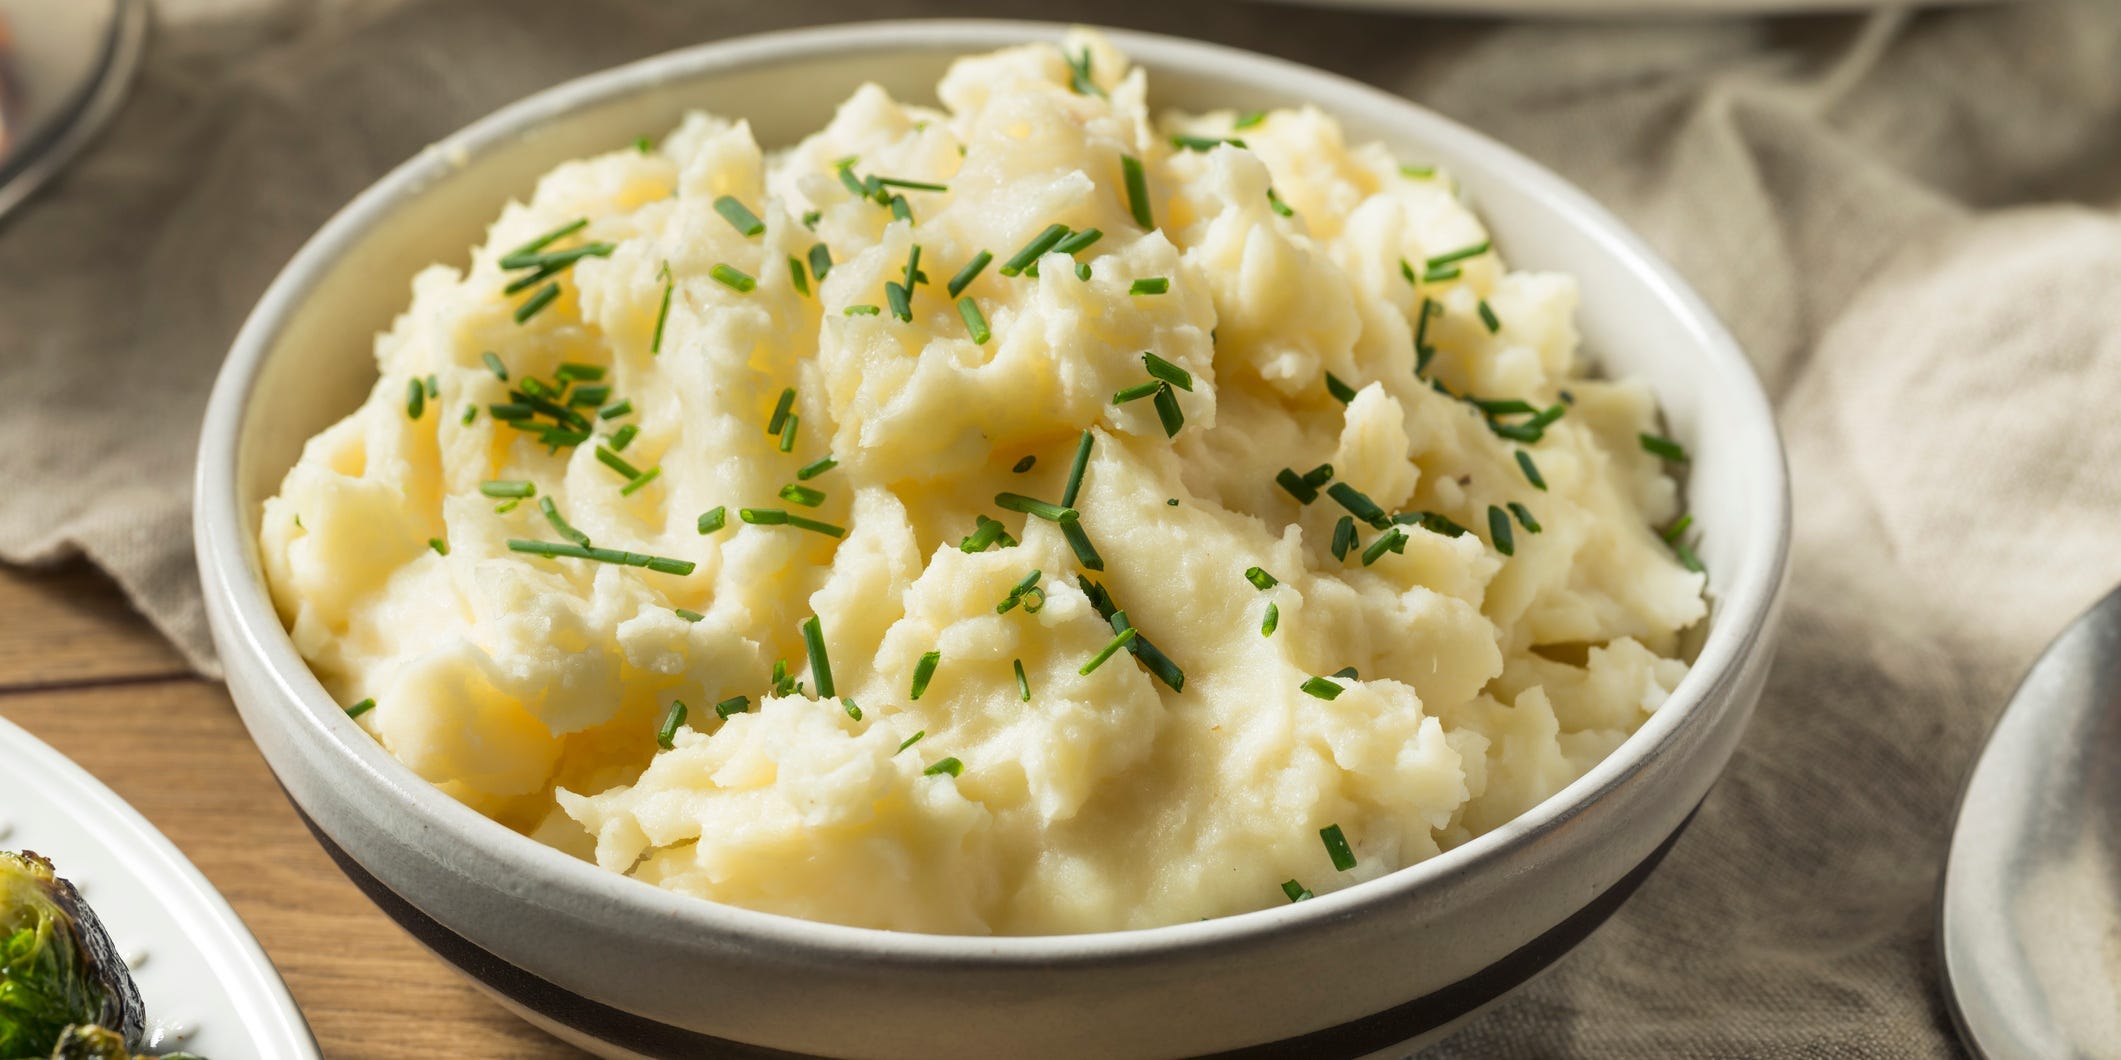 A bowl of mashed potatoes topped with chives